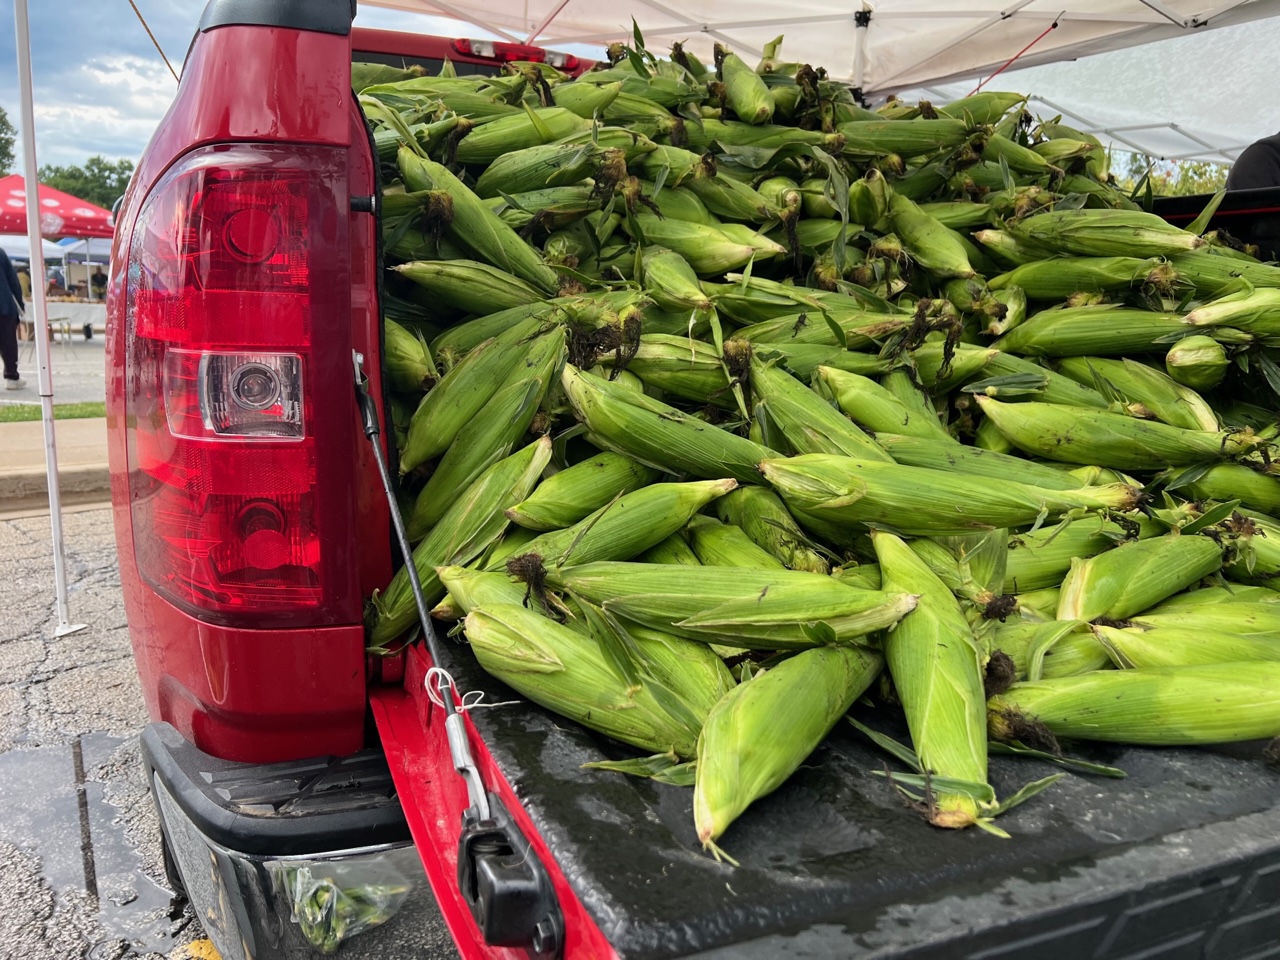 Corn sold from the back of a red pickup truck. Photo by Alyssa Buckley.